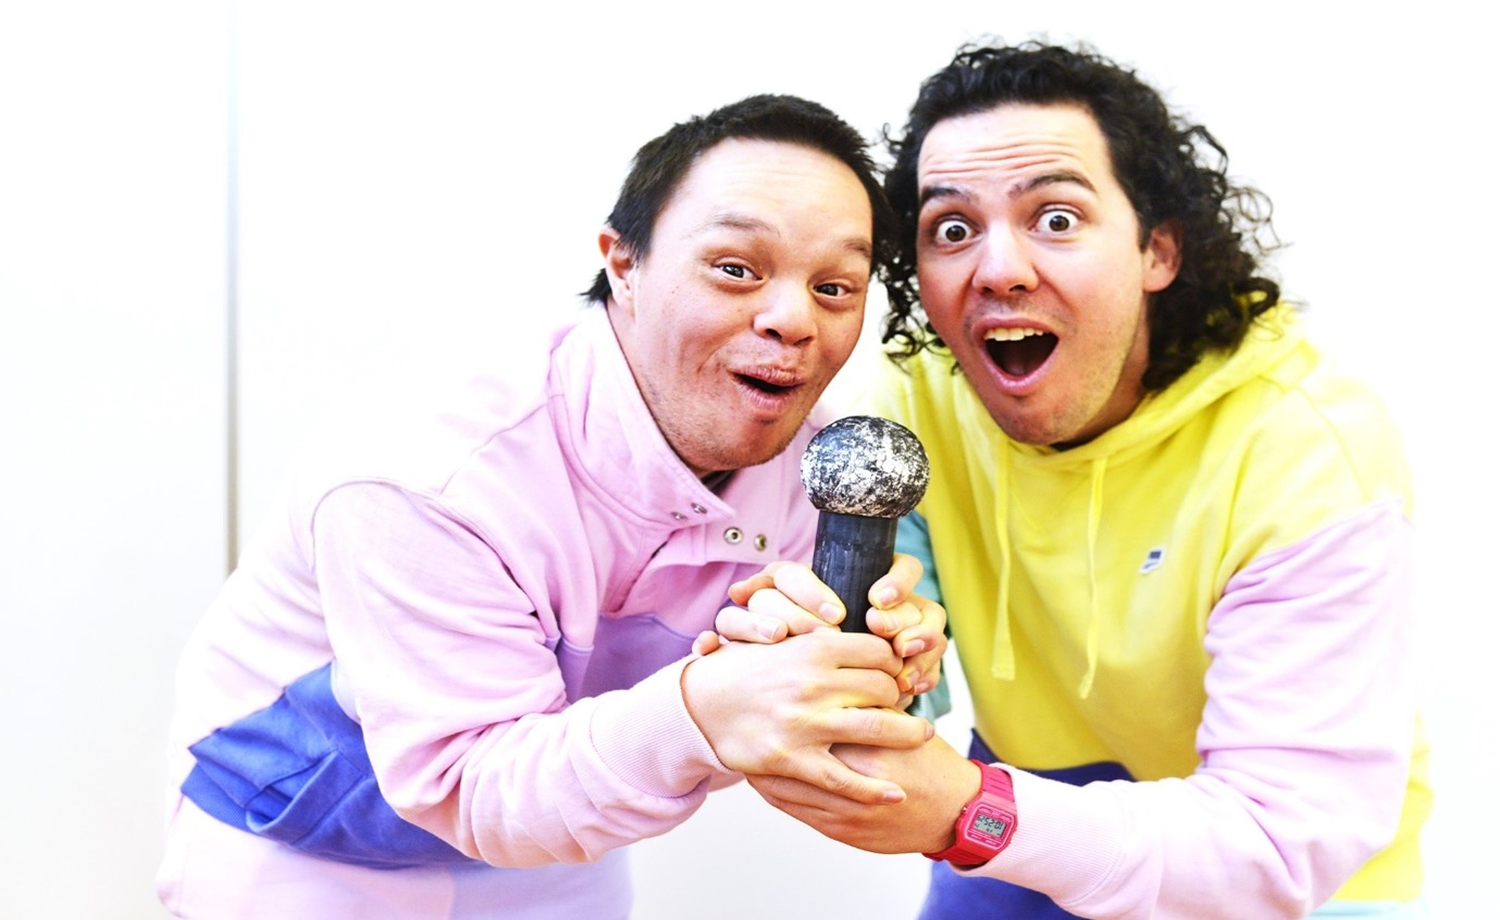 Two male performers in pastel coloured tracksuits side by side with both sets of hands clutching at one makeshift microphone. Both have friendly eyes smiles beckoning you to come to their new show. Image from Breakaway by William Bailey and David Maney, as part of VV's mentoring programs. Photo David de Roach 2022